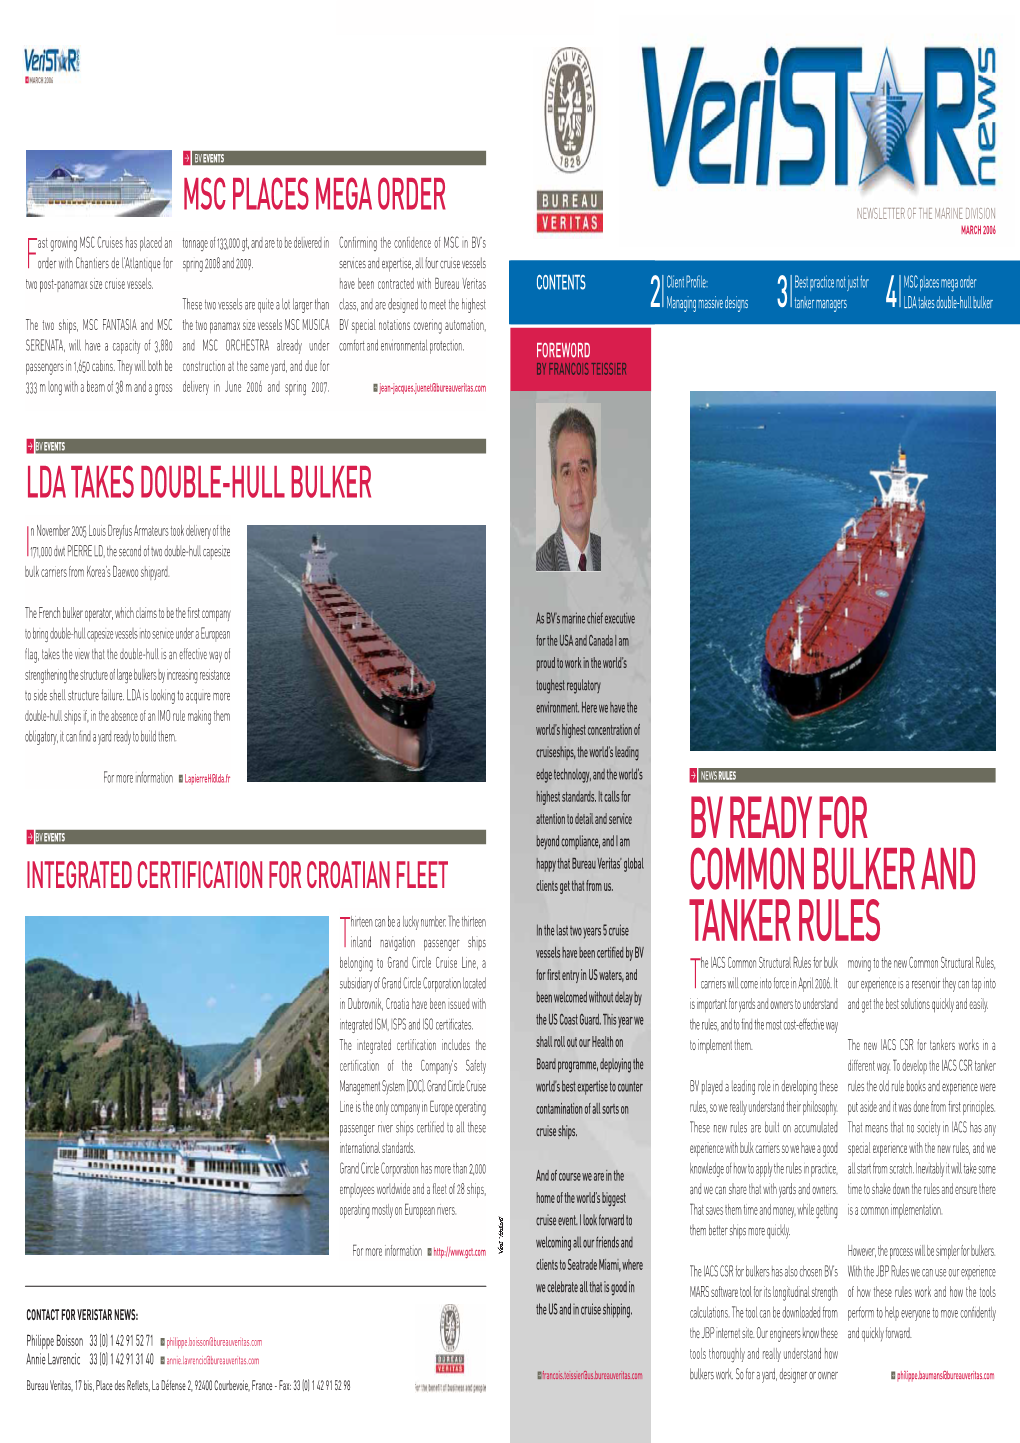 Bv Ready for Common Bulker and Tanker Rules